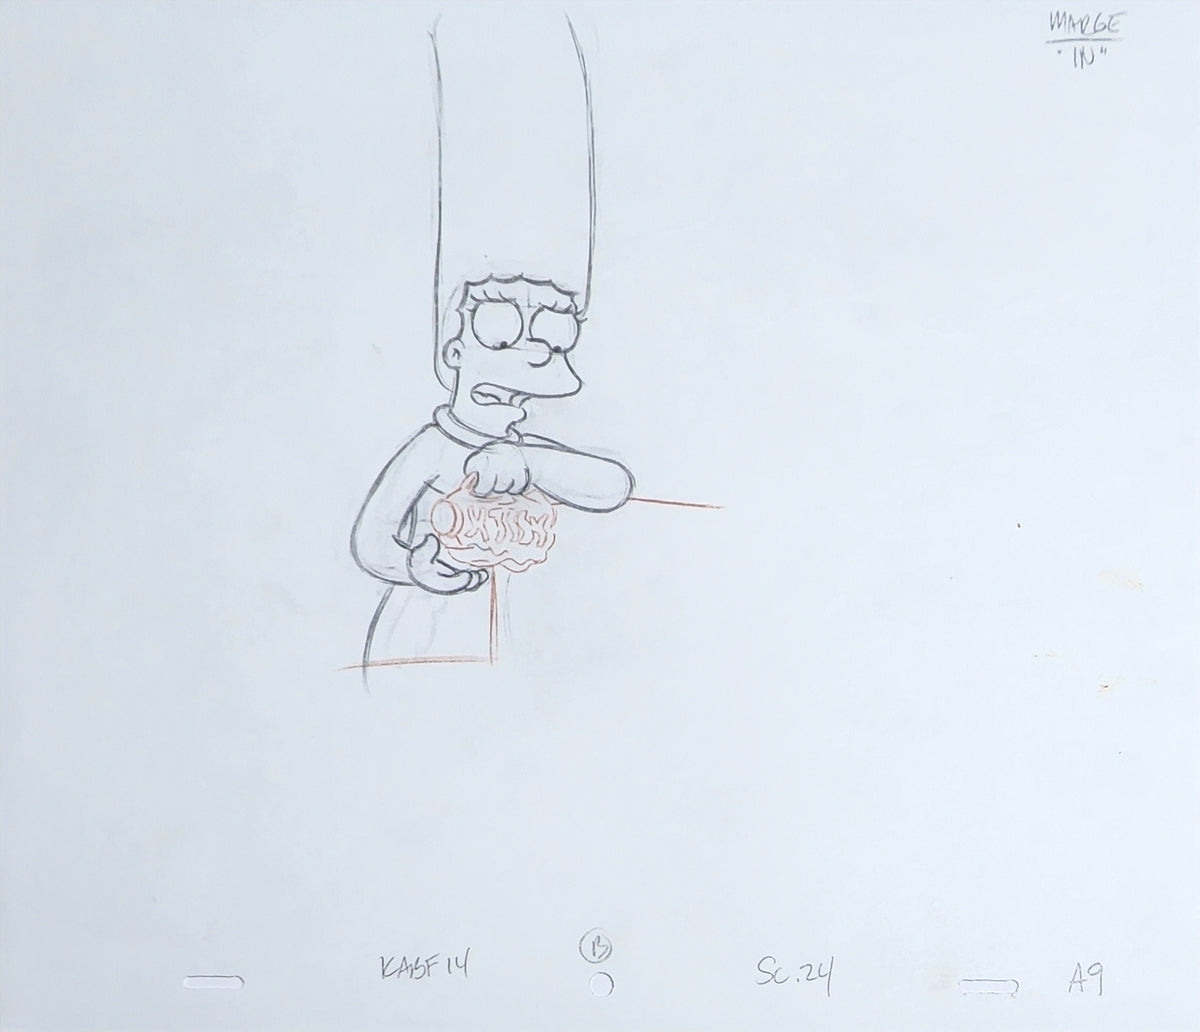 Simpsons Animation Production Cel Drawing: Marge - 3839